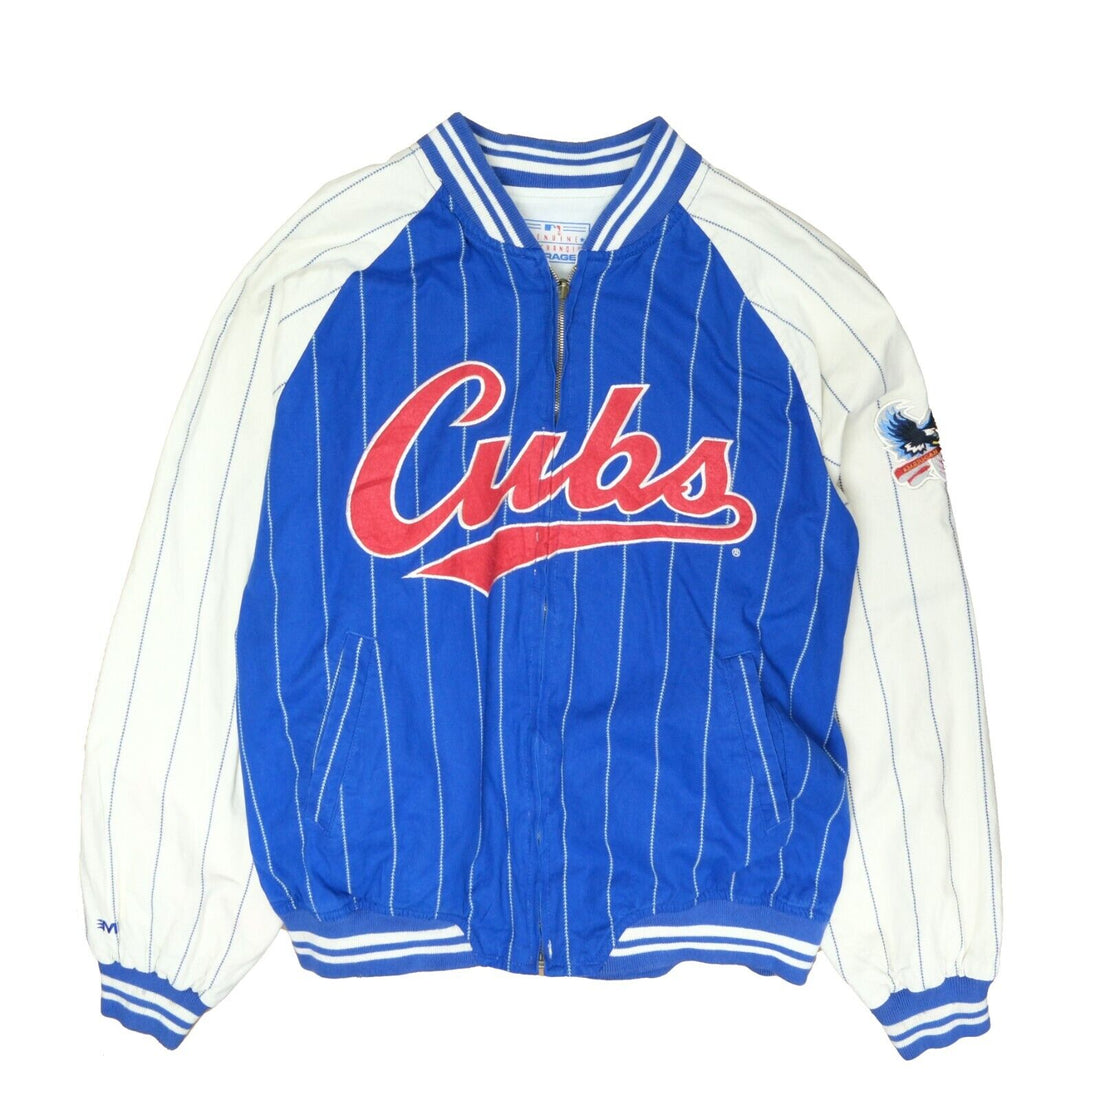 Buy Chicago Cubs Vintage Mirage MLB Baseball Jersey Stitched